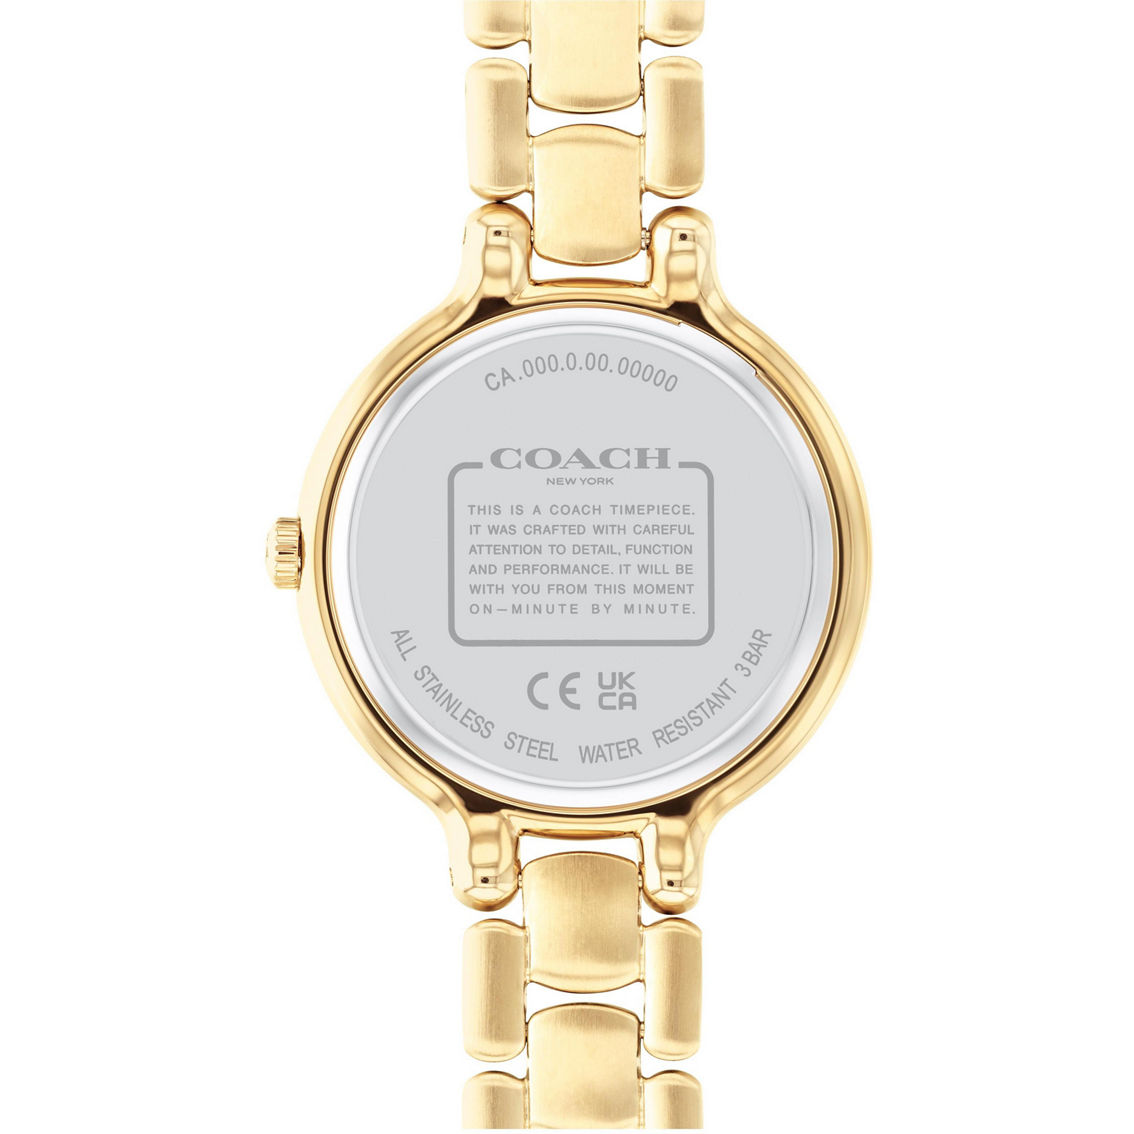 COACH Women's Chelsea Goldtone/Crystal Watch 14504251 - Image 2 of 2